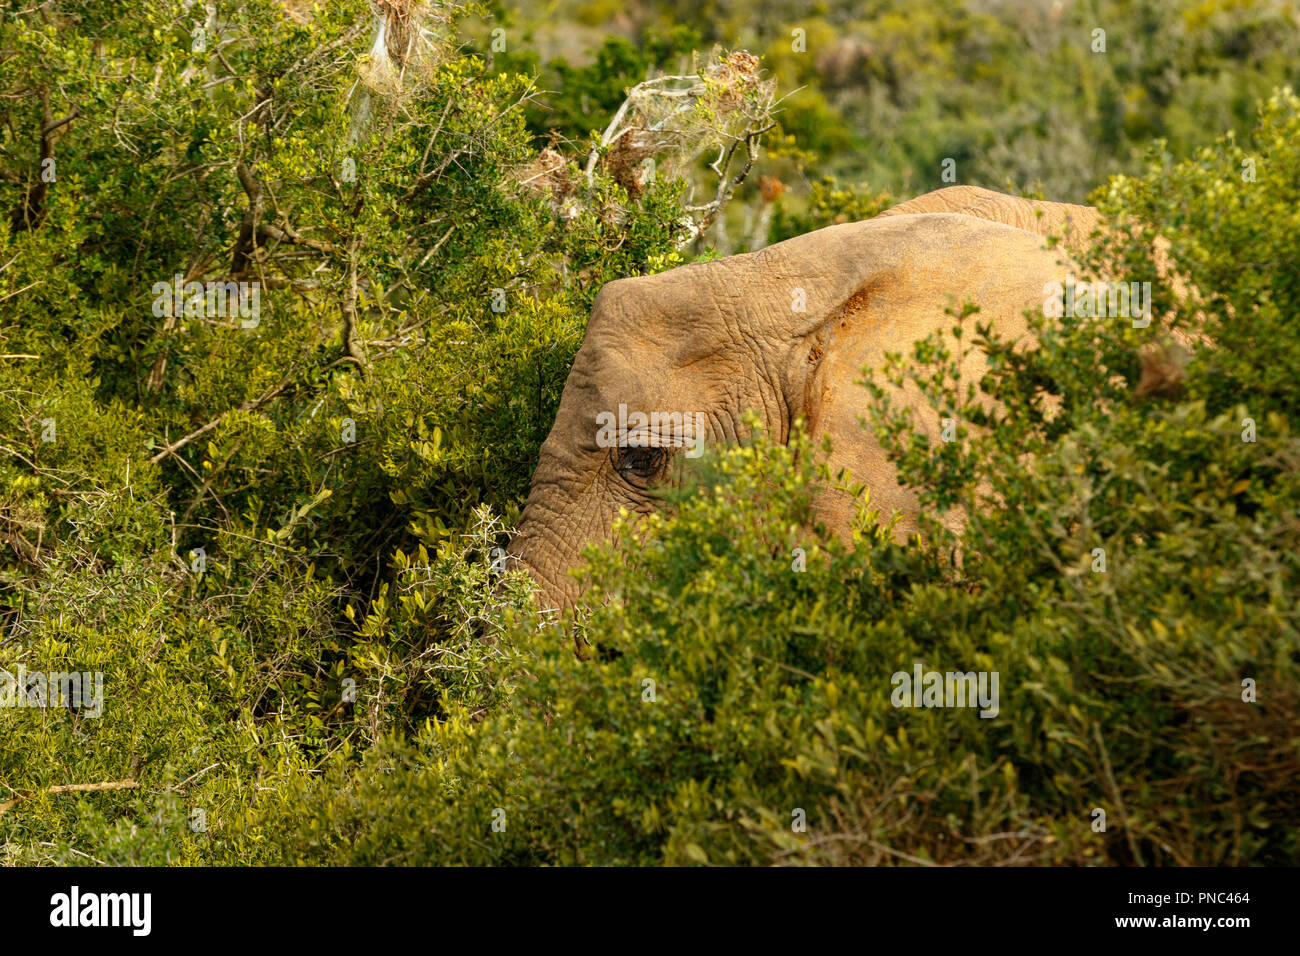 Elephant hiding between all the bushes in the field Stock Photo